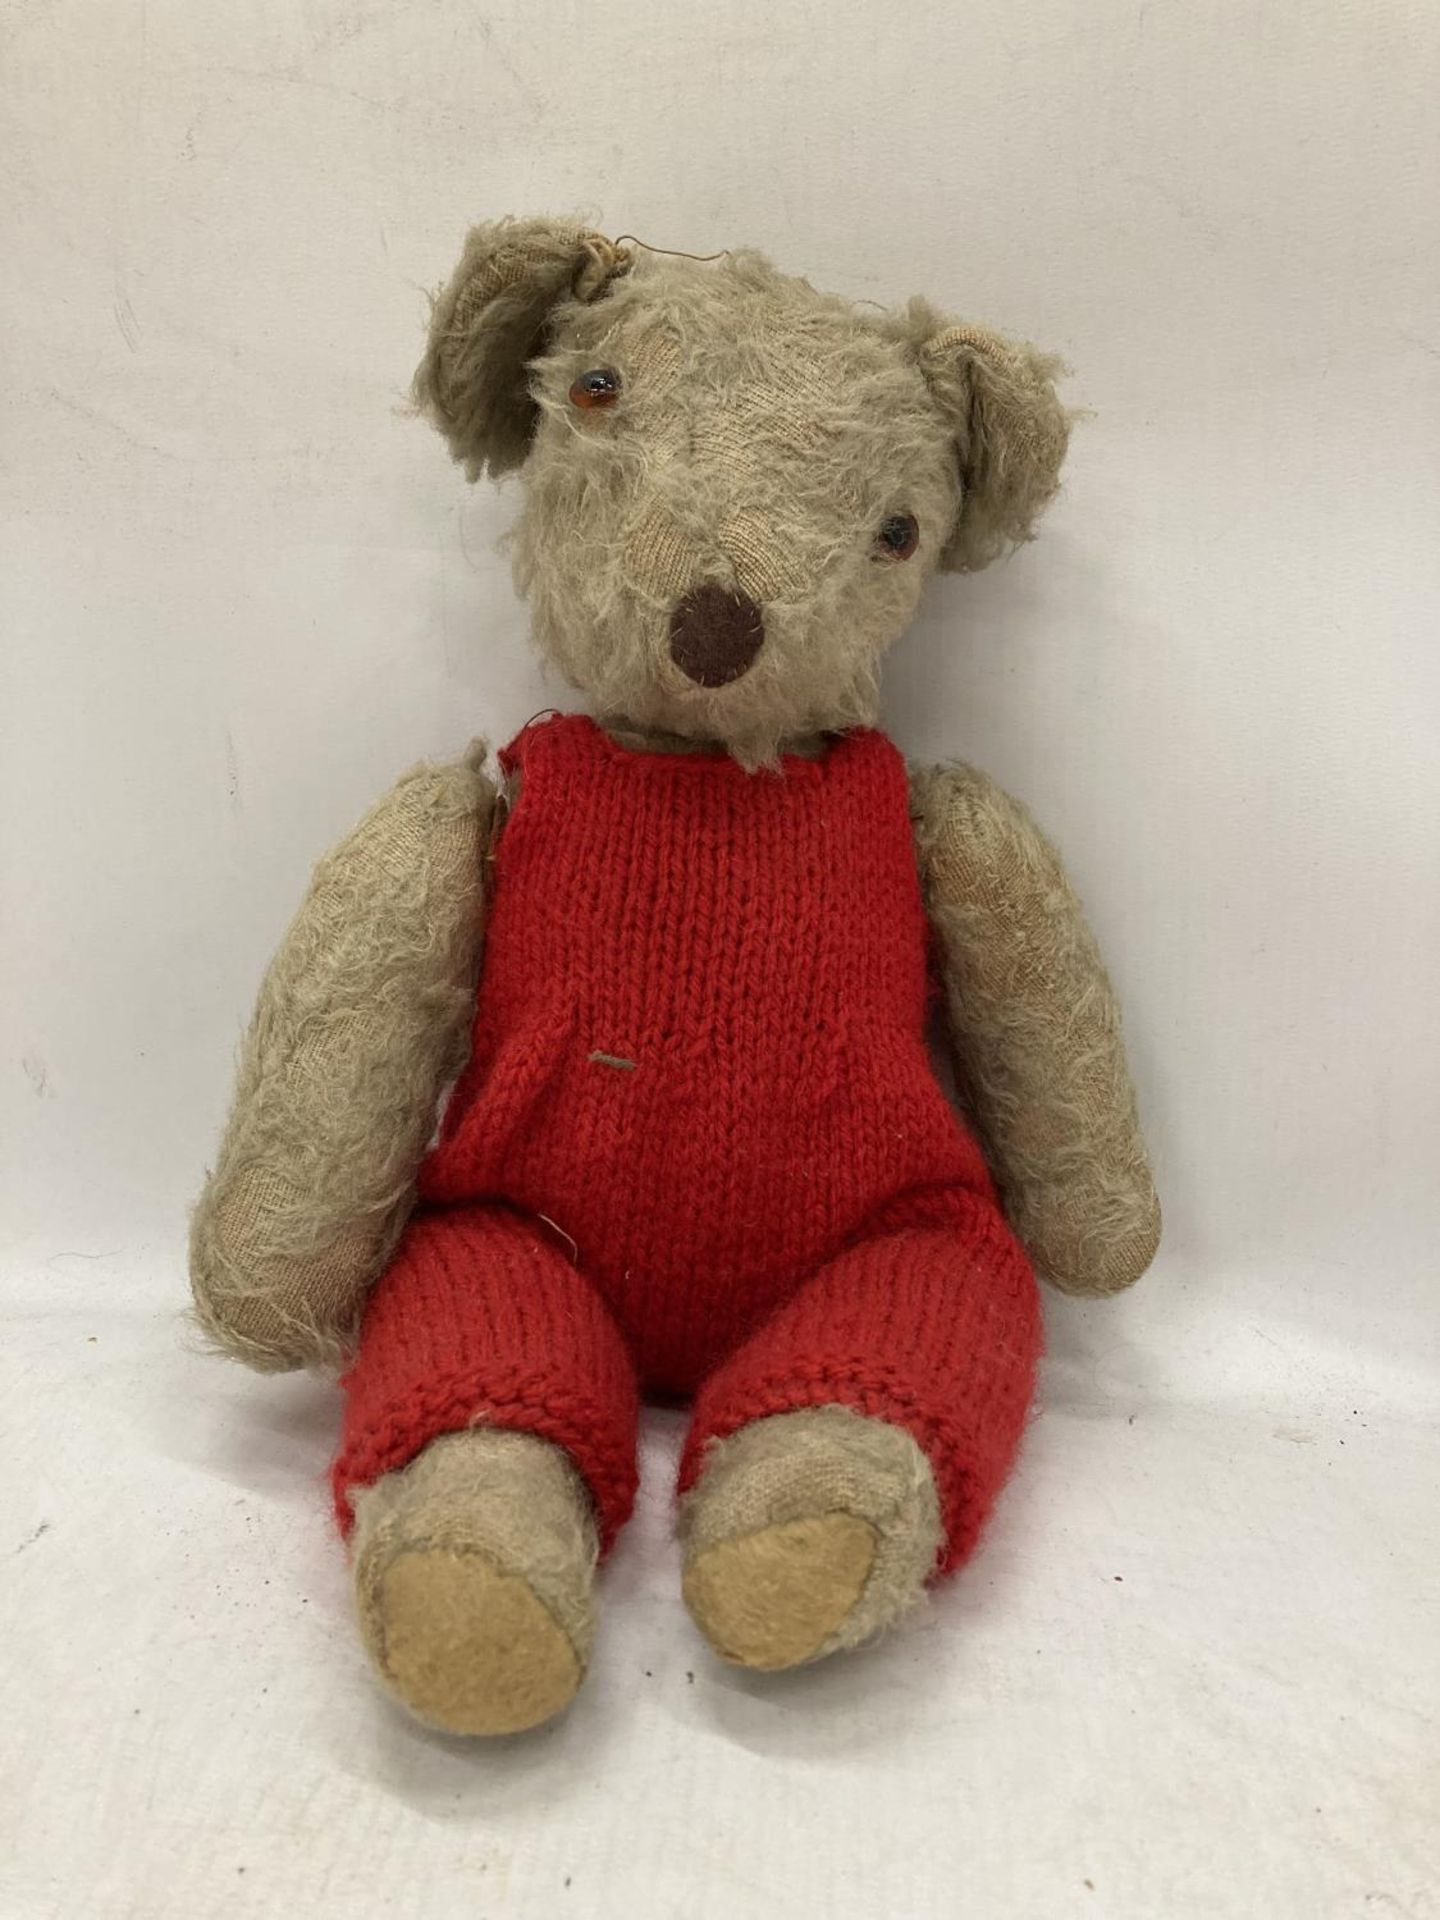 A VINTAGE TEDDY BEAR WITH JOINTED ARMS AND LEGS